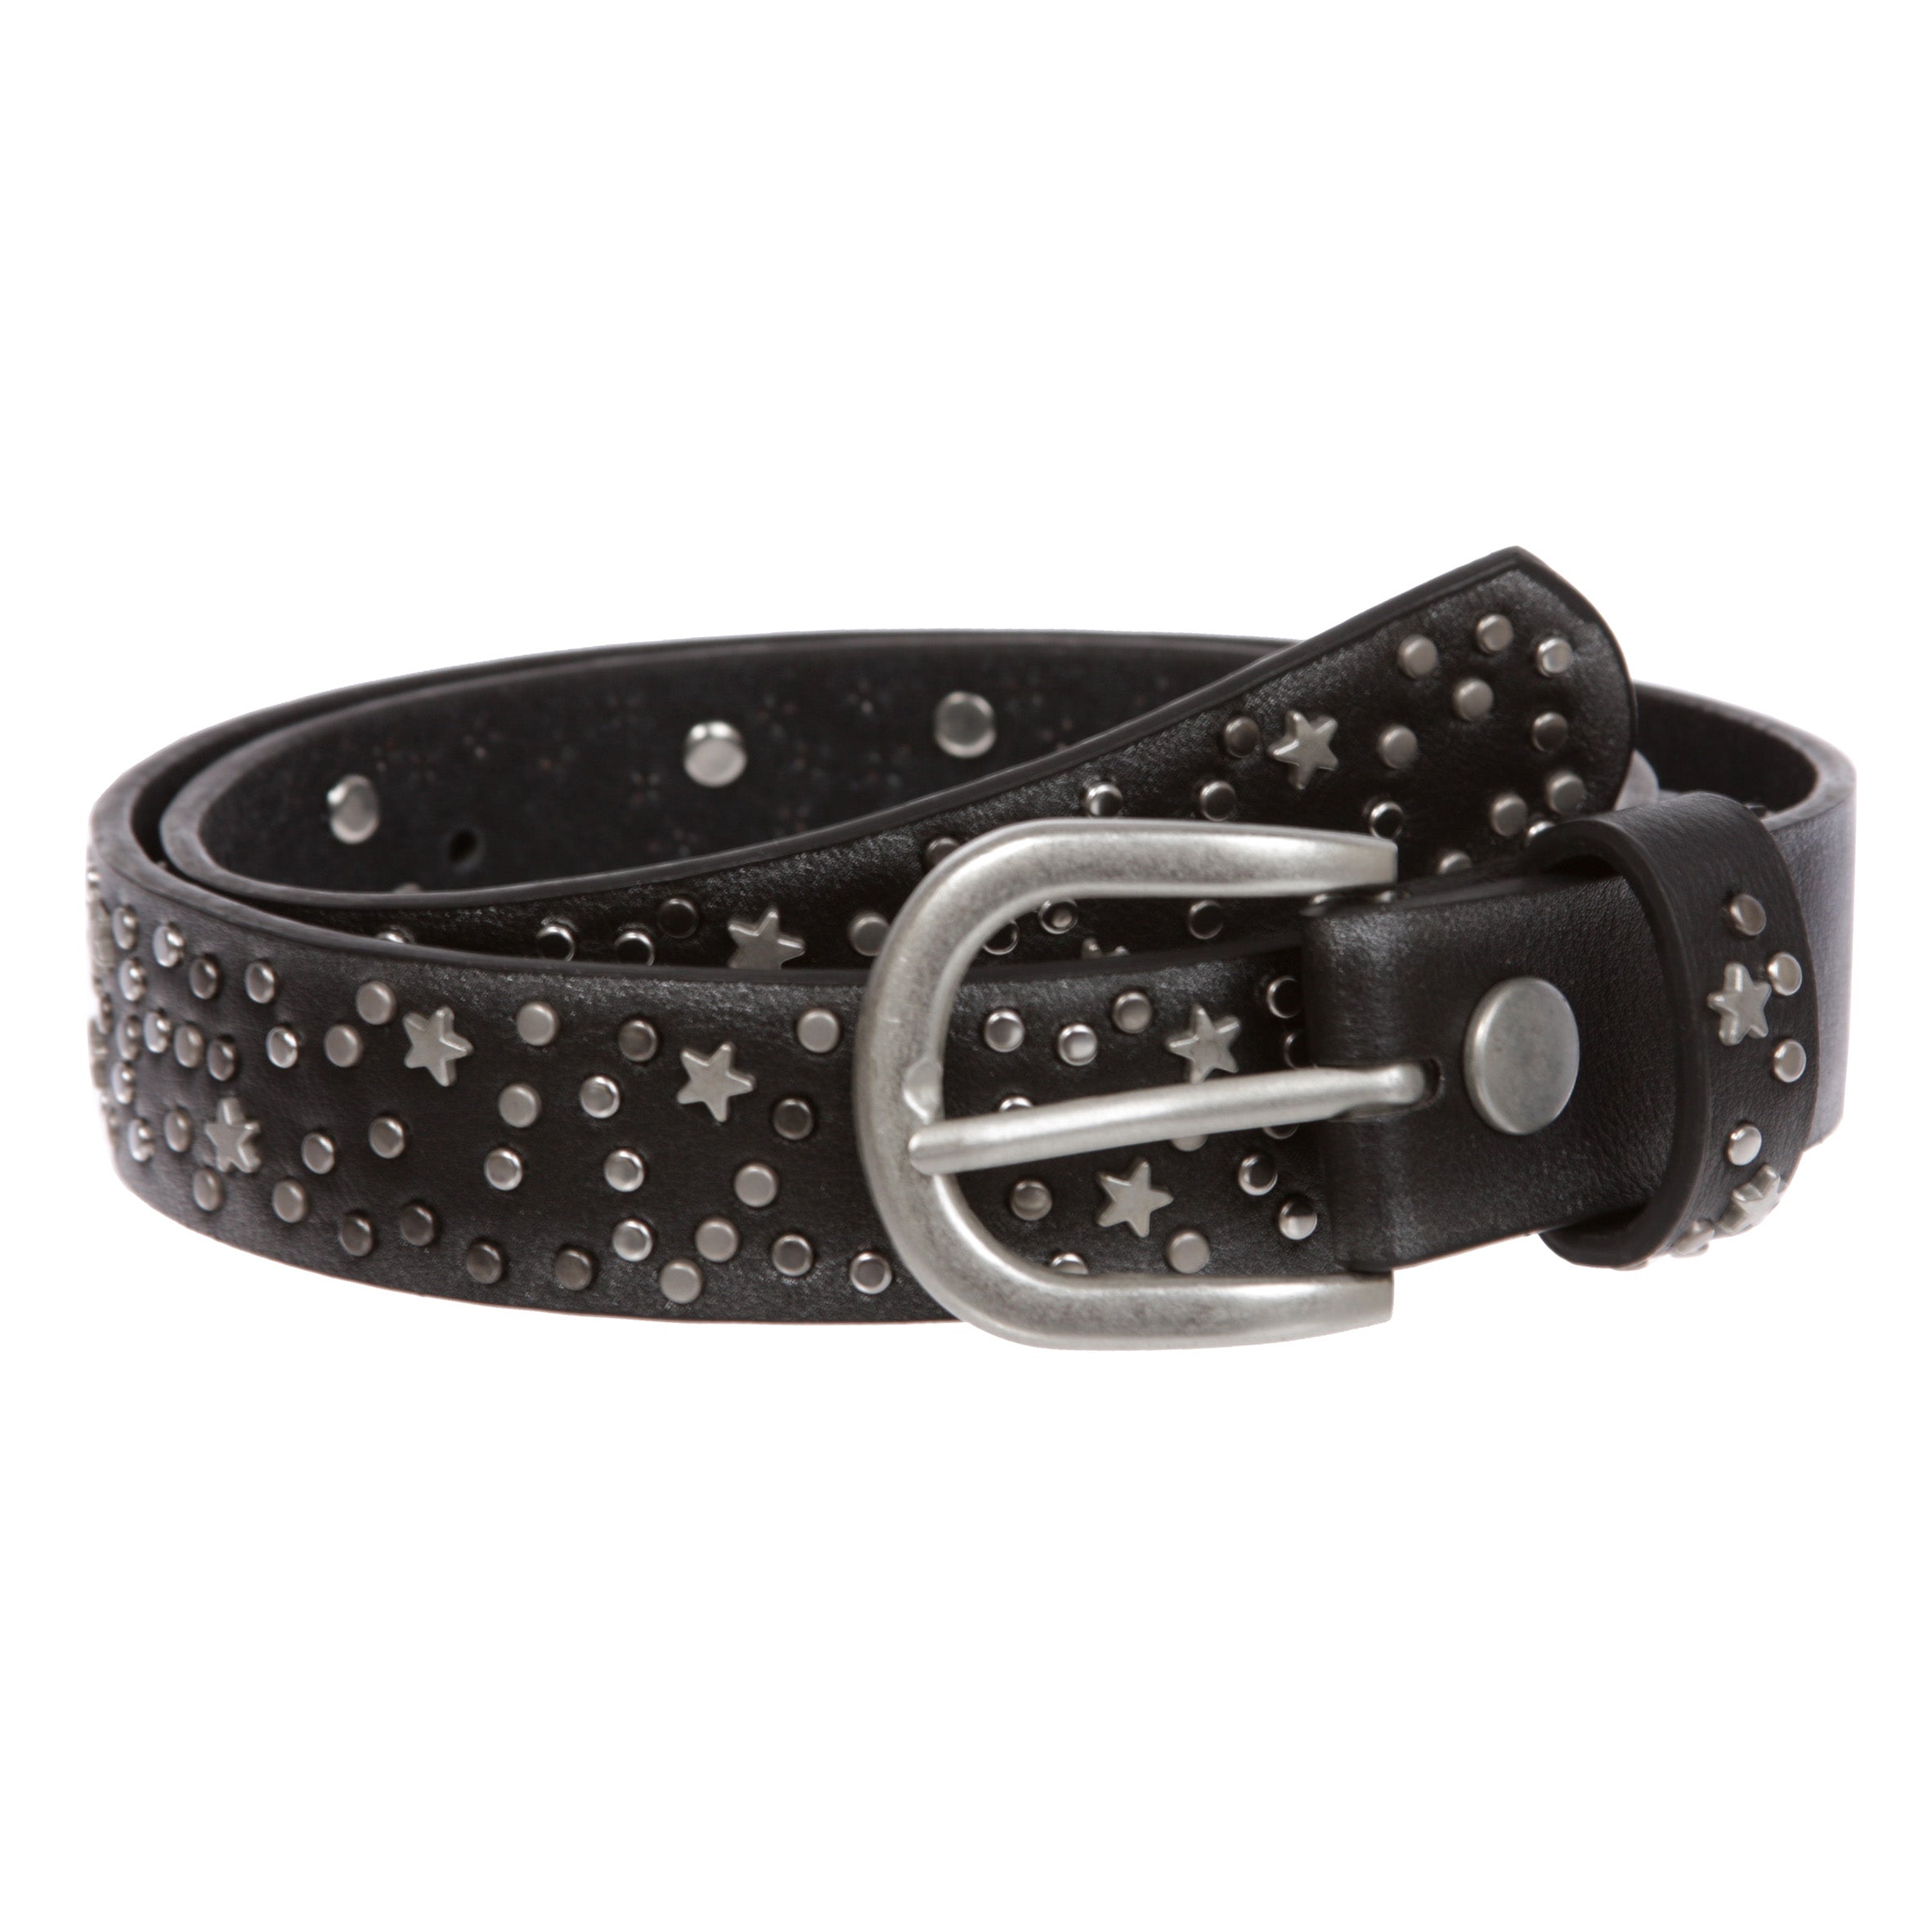 Kids 1 1/8" (30 mm) Boys And Girls Snap On Star Circle Studded Belt